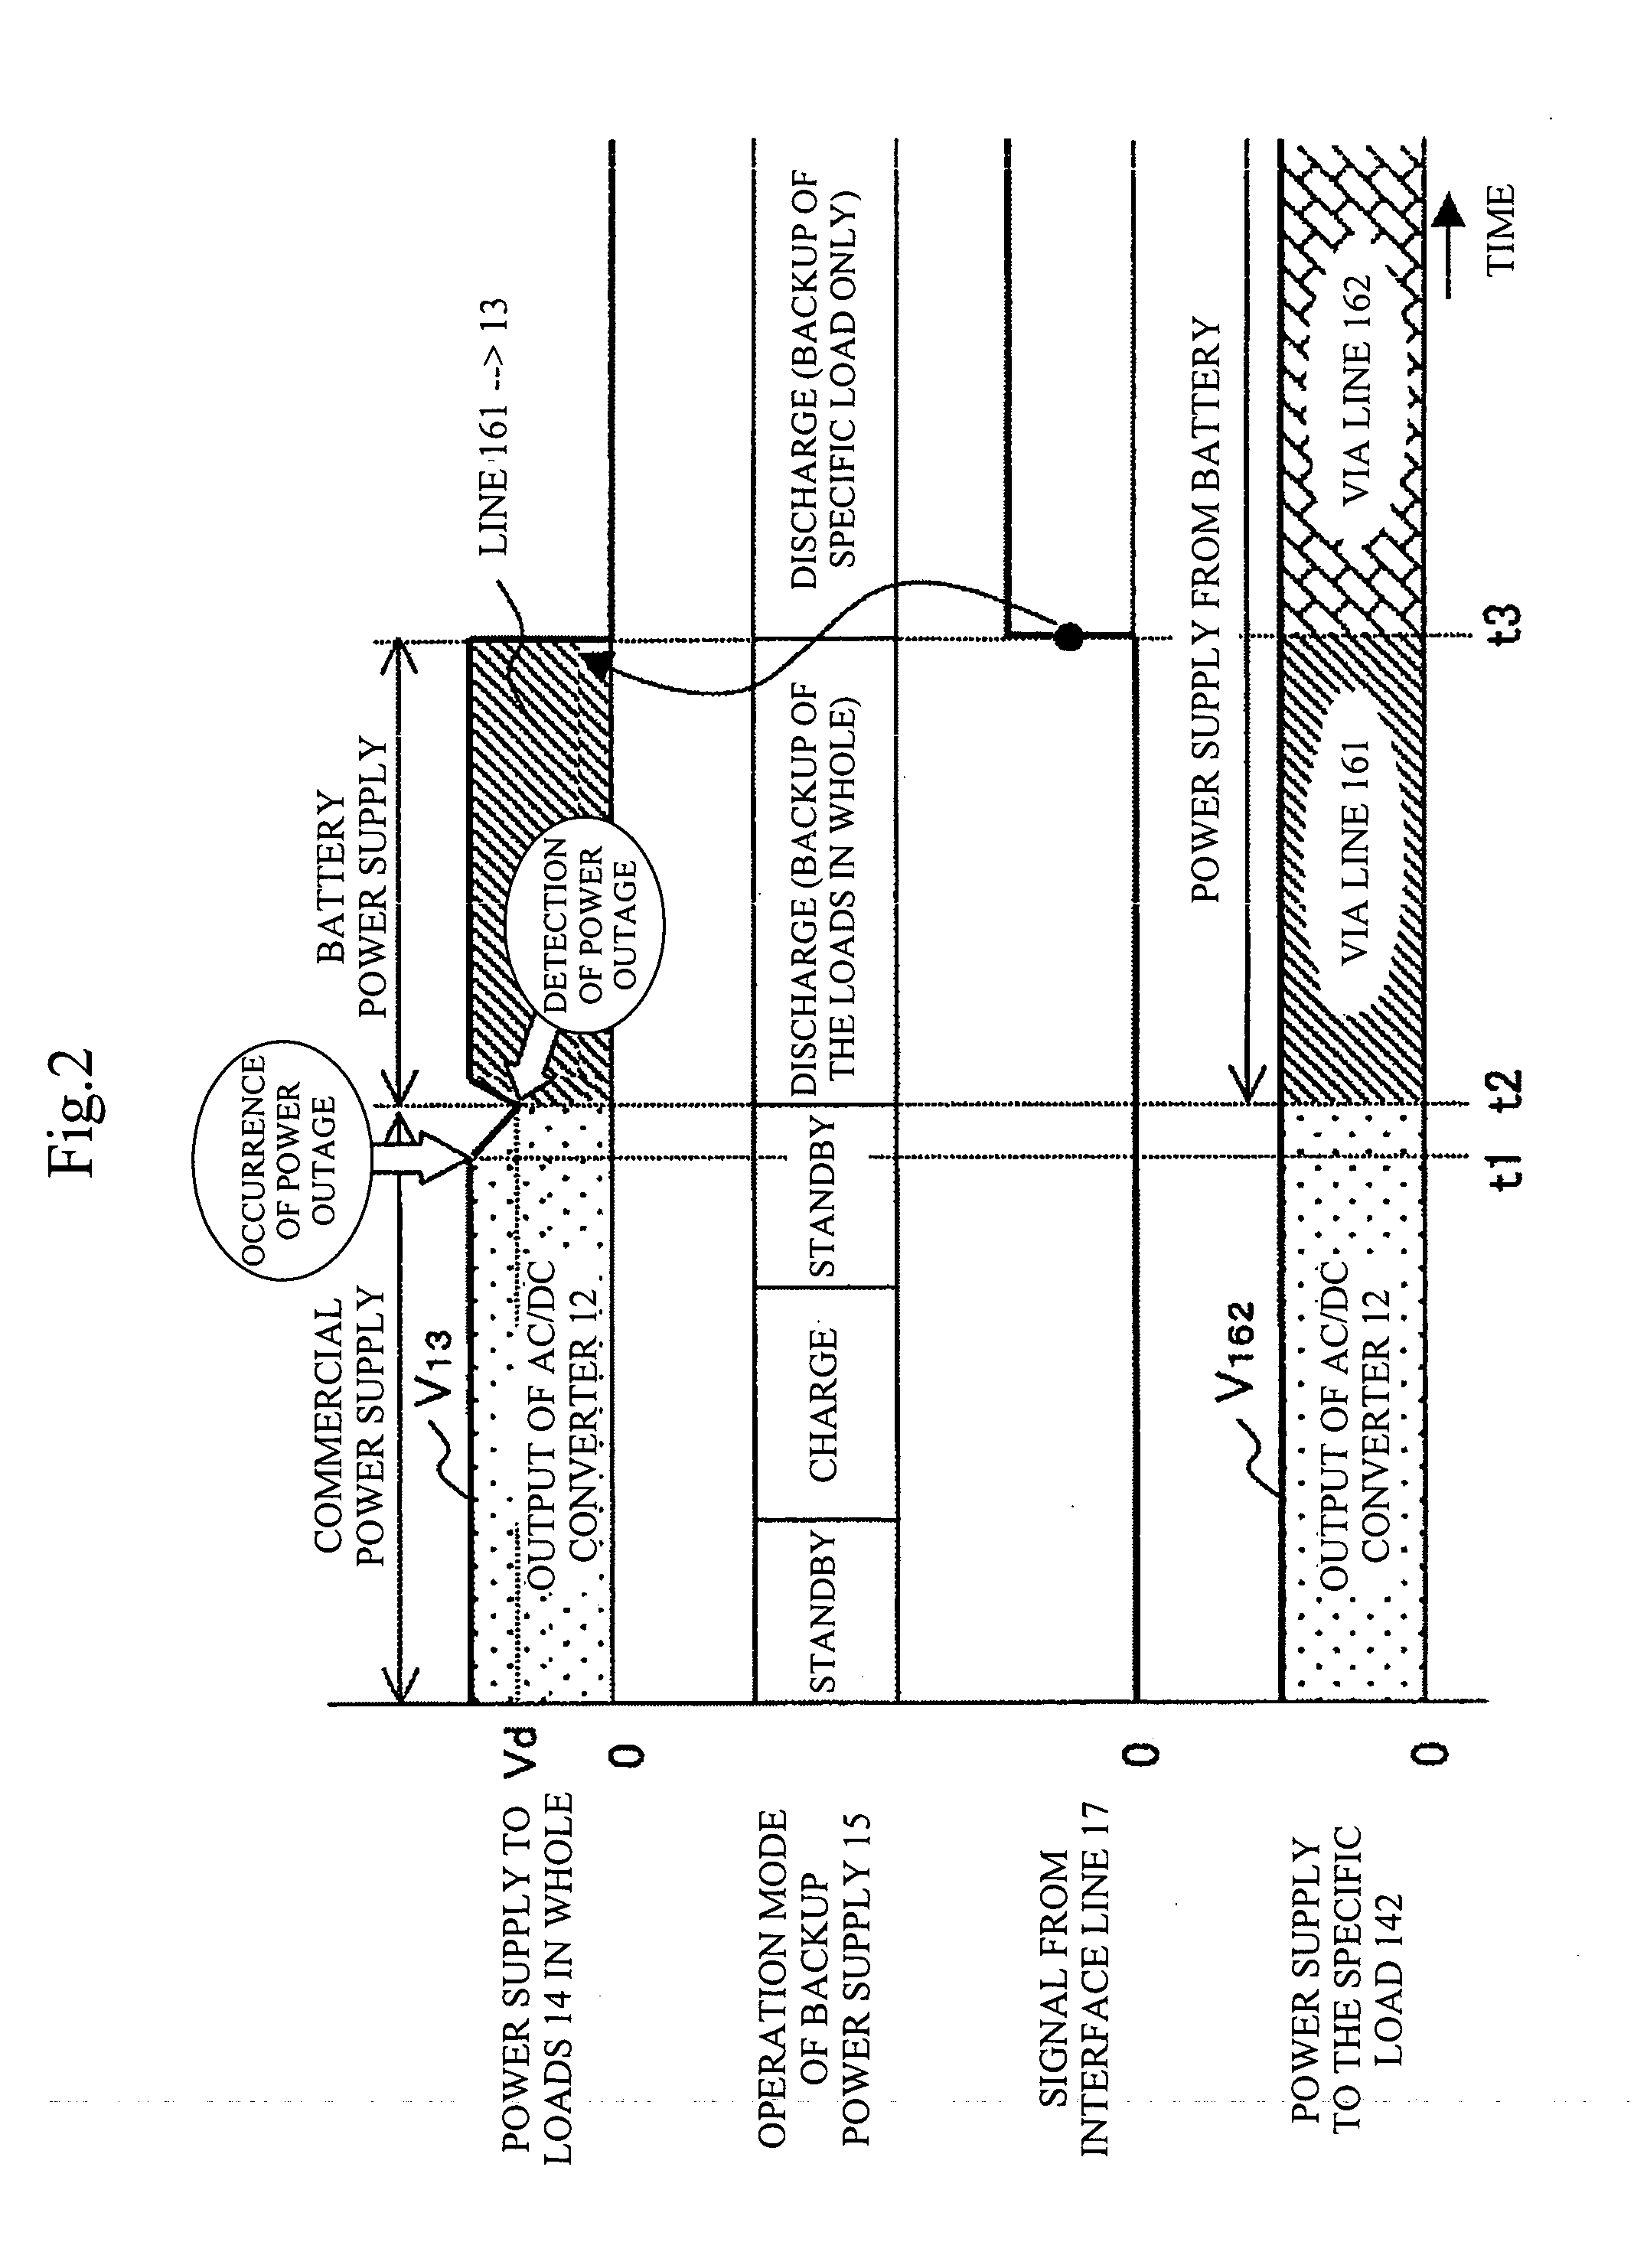 DC backup power supply system and disk array using same